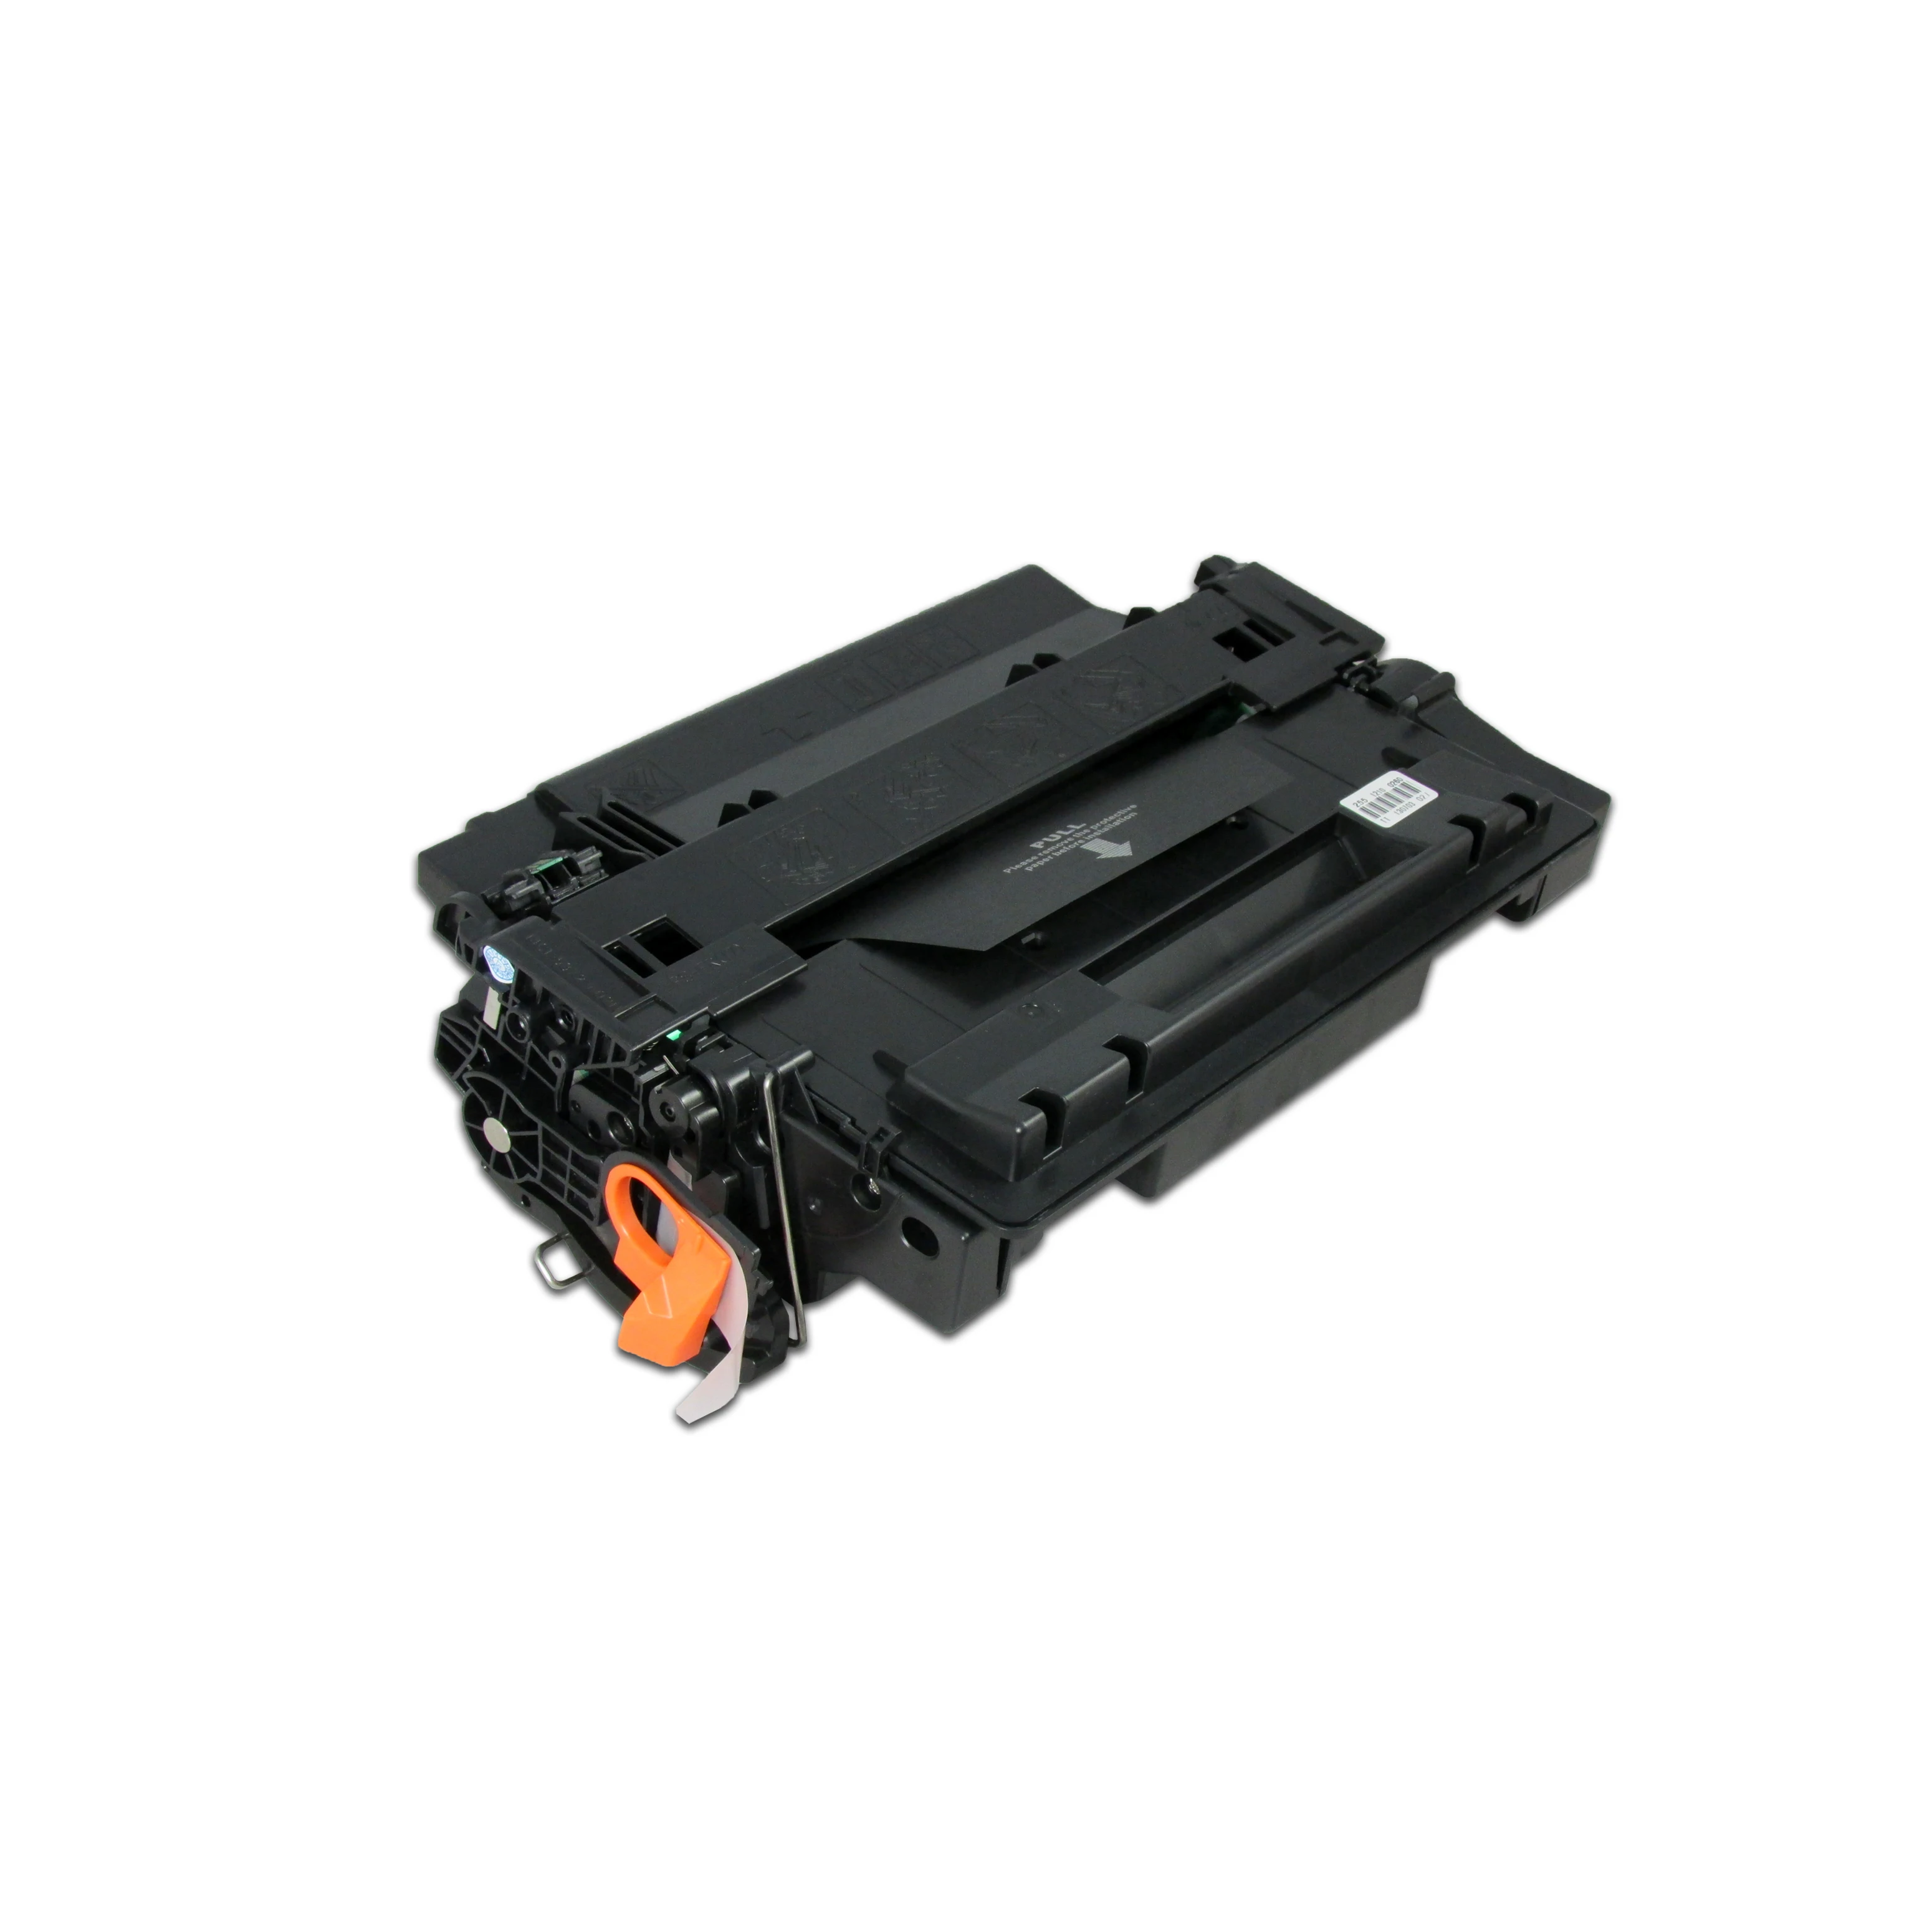 China low price products compatible toner cartridges